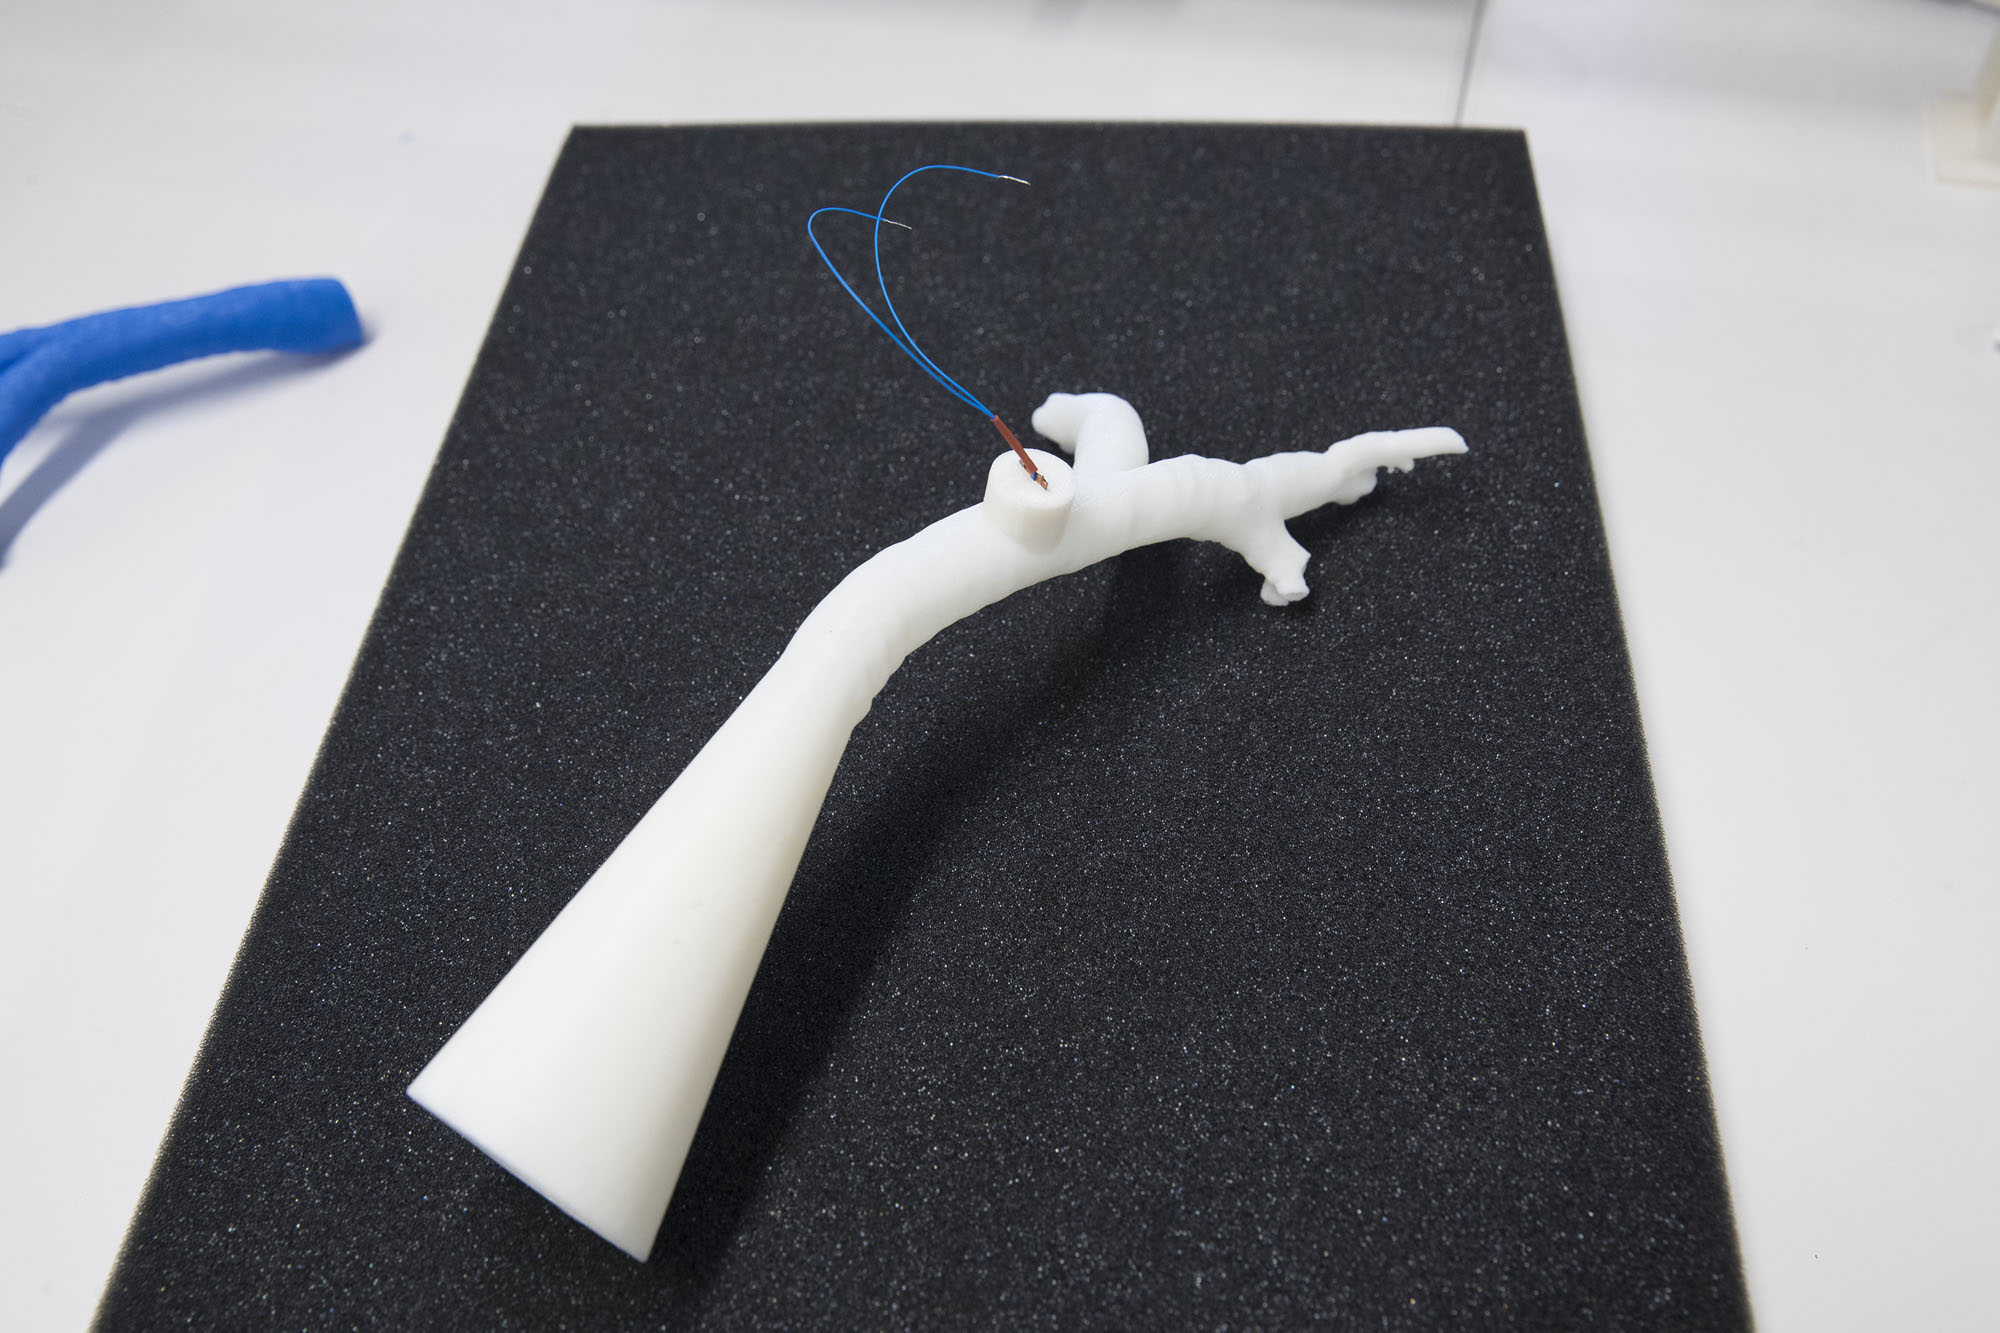 3-D-printed trachea model made to scale